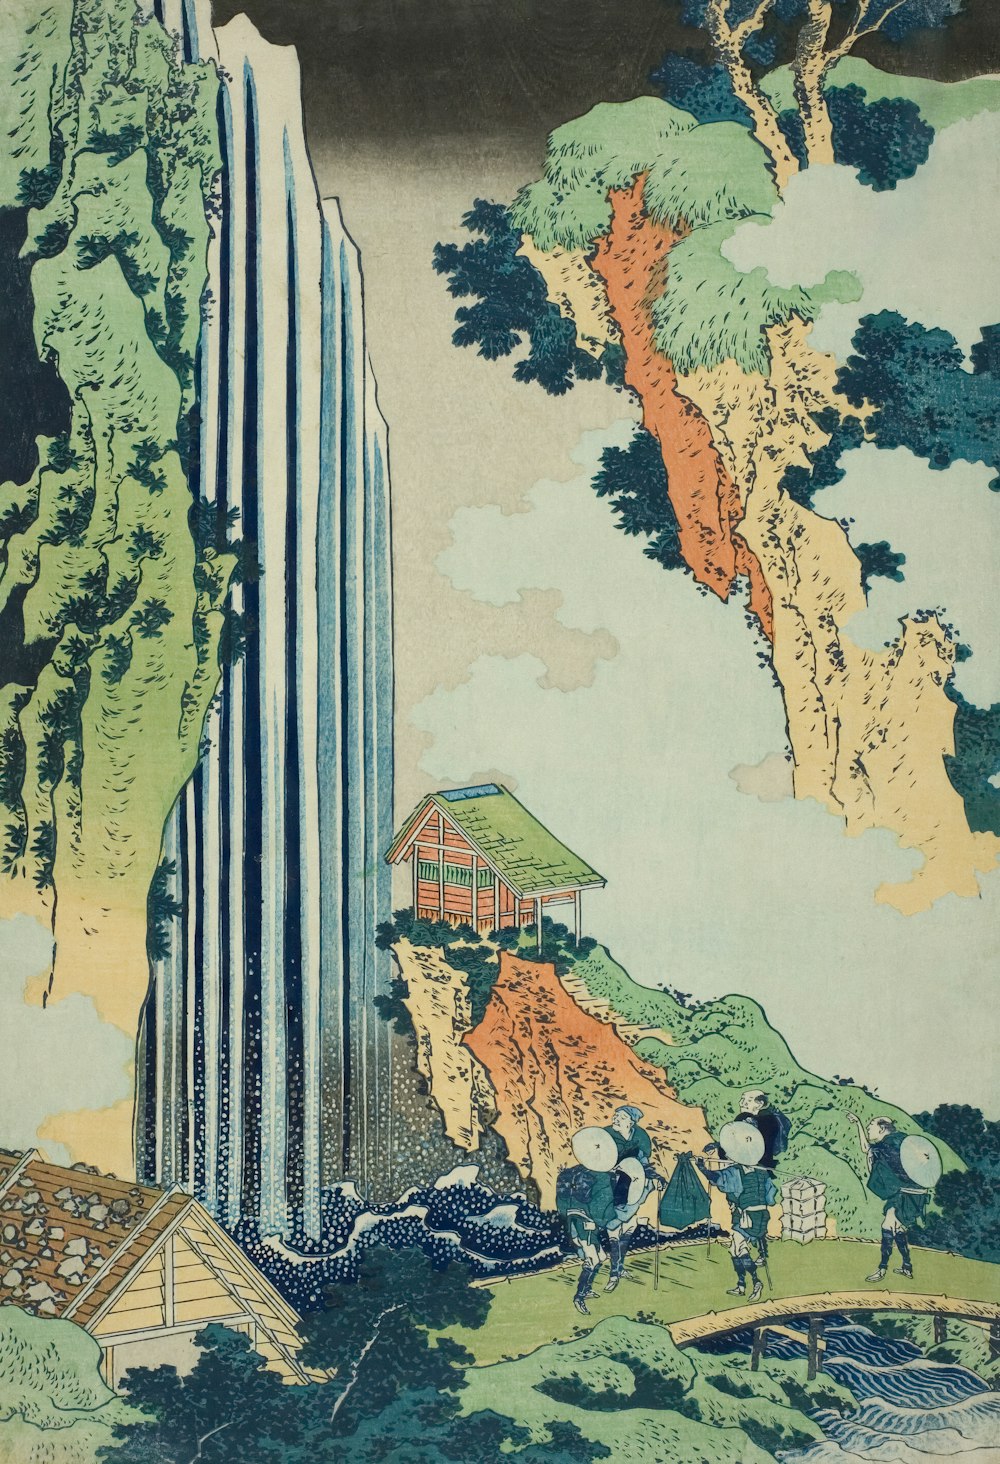 a painting of a waterfall with people near it